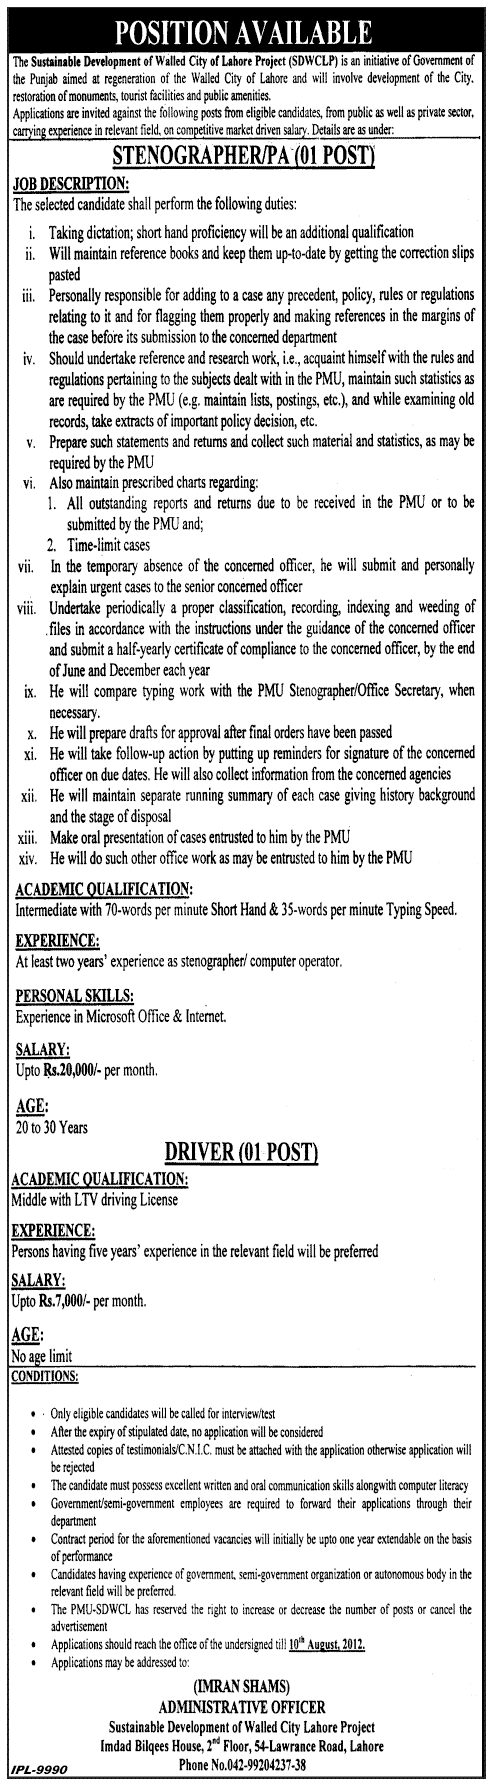 Stenographer and Driver Required Under SDWCLP Project (Government Job)